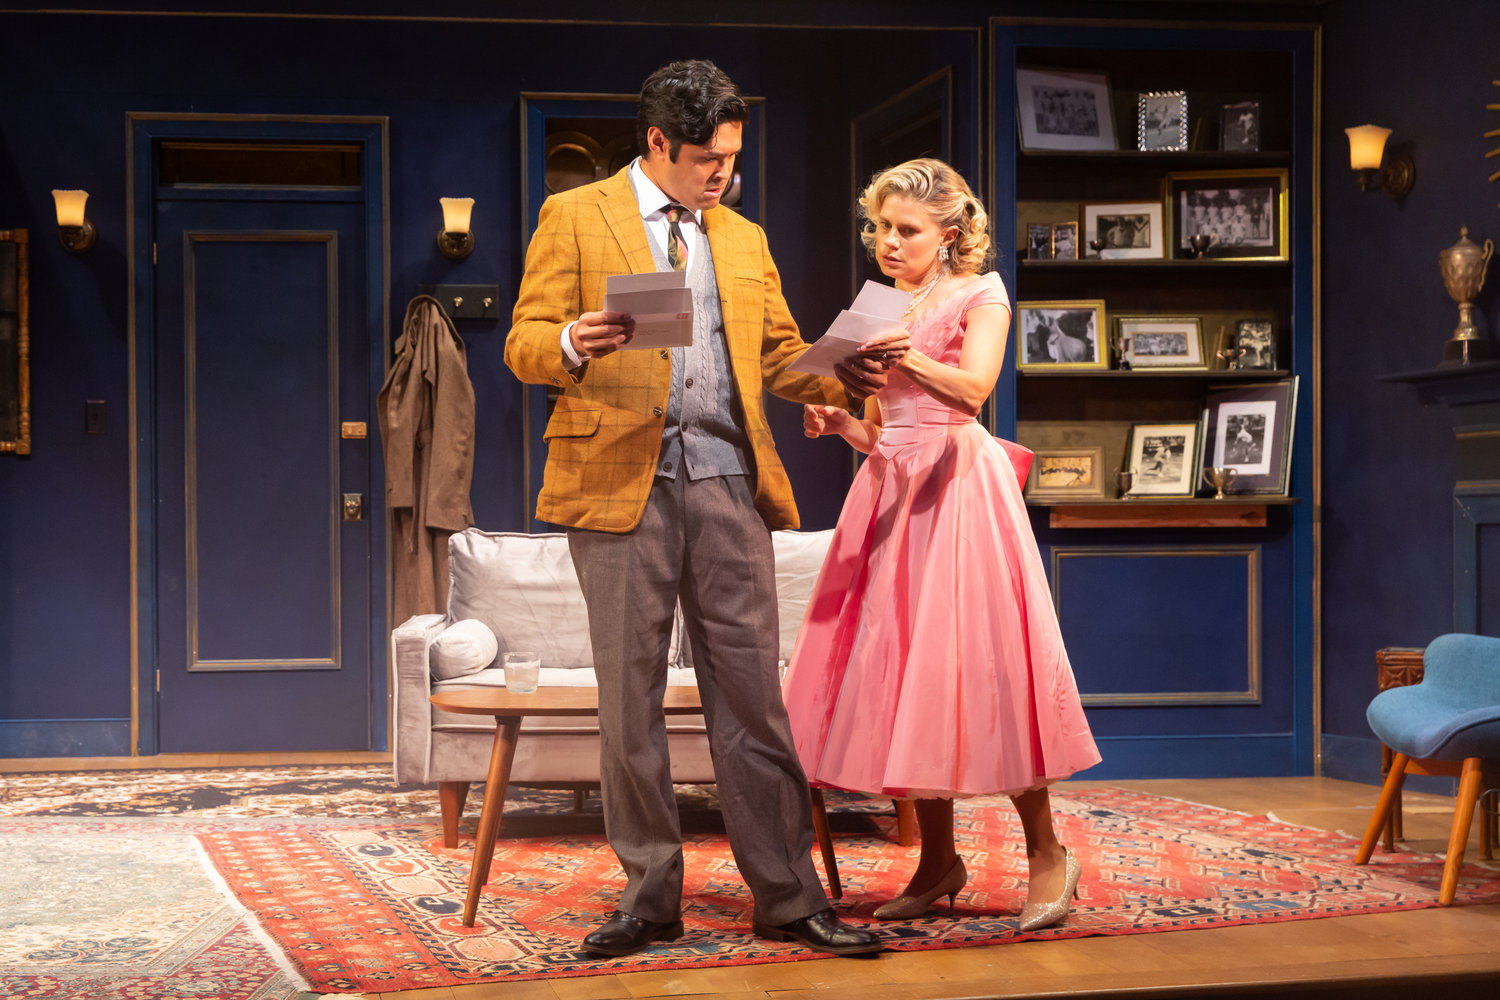 Kavin Panmeechao and Celia Keenan-Bolger in White Heron Theatre’s production of “Dial M for Murder,” extended through Aug. 16.